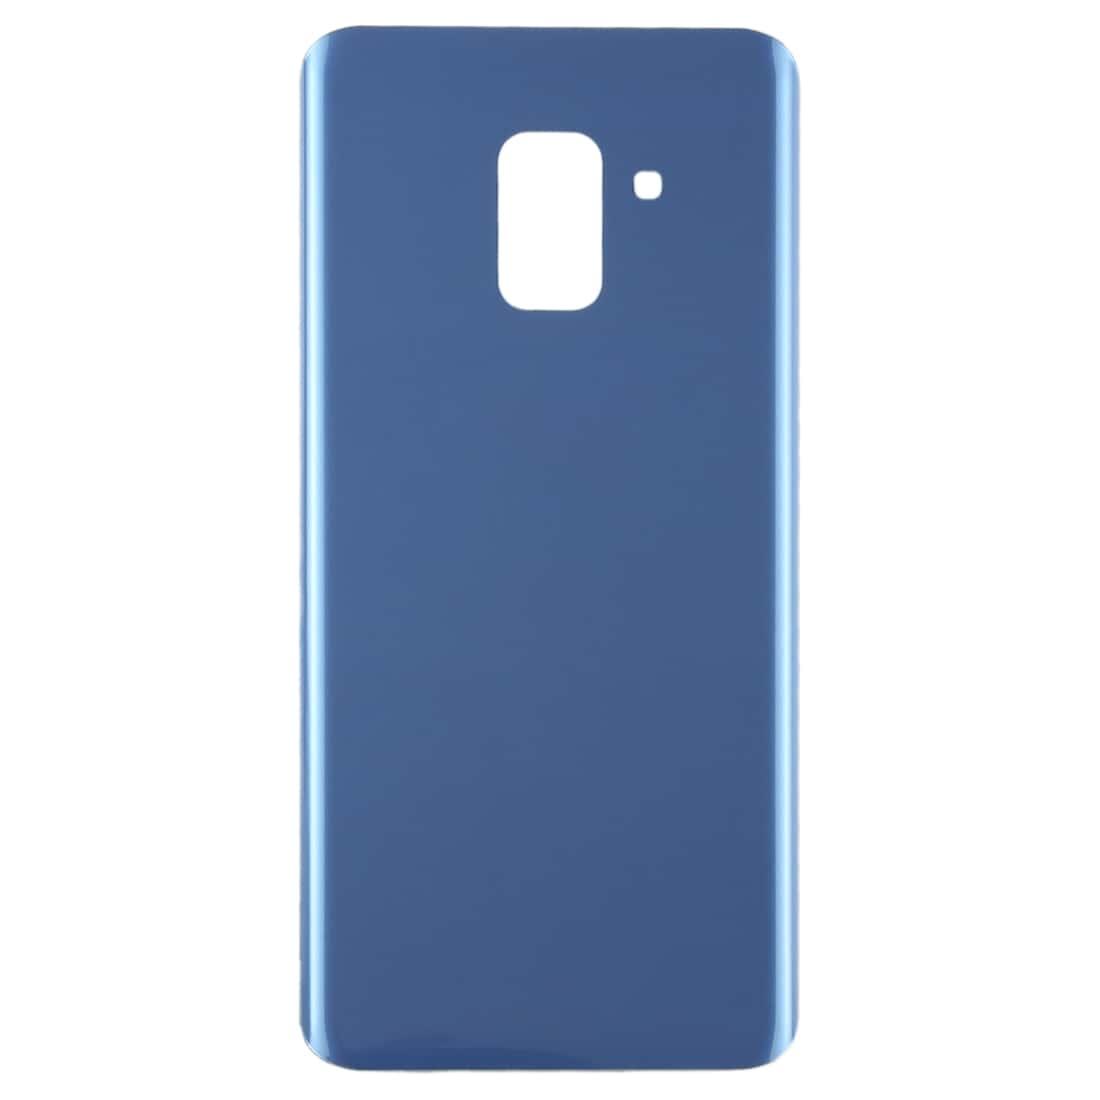 Back Glass Panel for  Samsung Galaxy A8 Plus 2018 A730 Blue